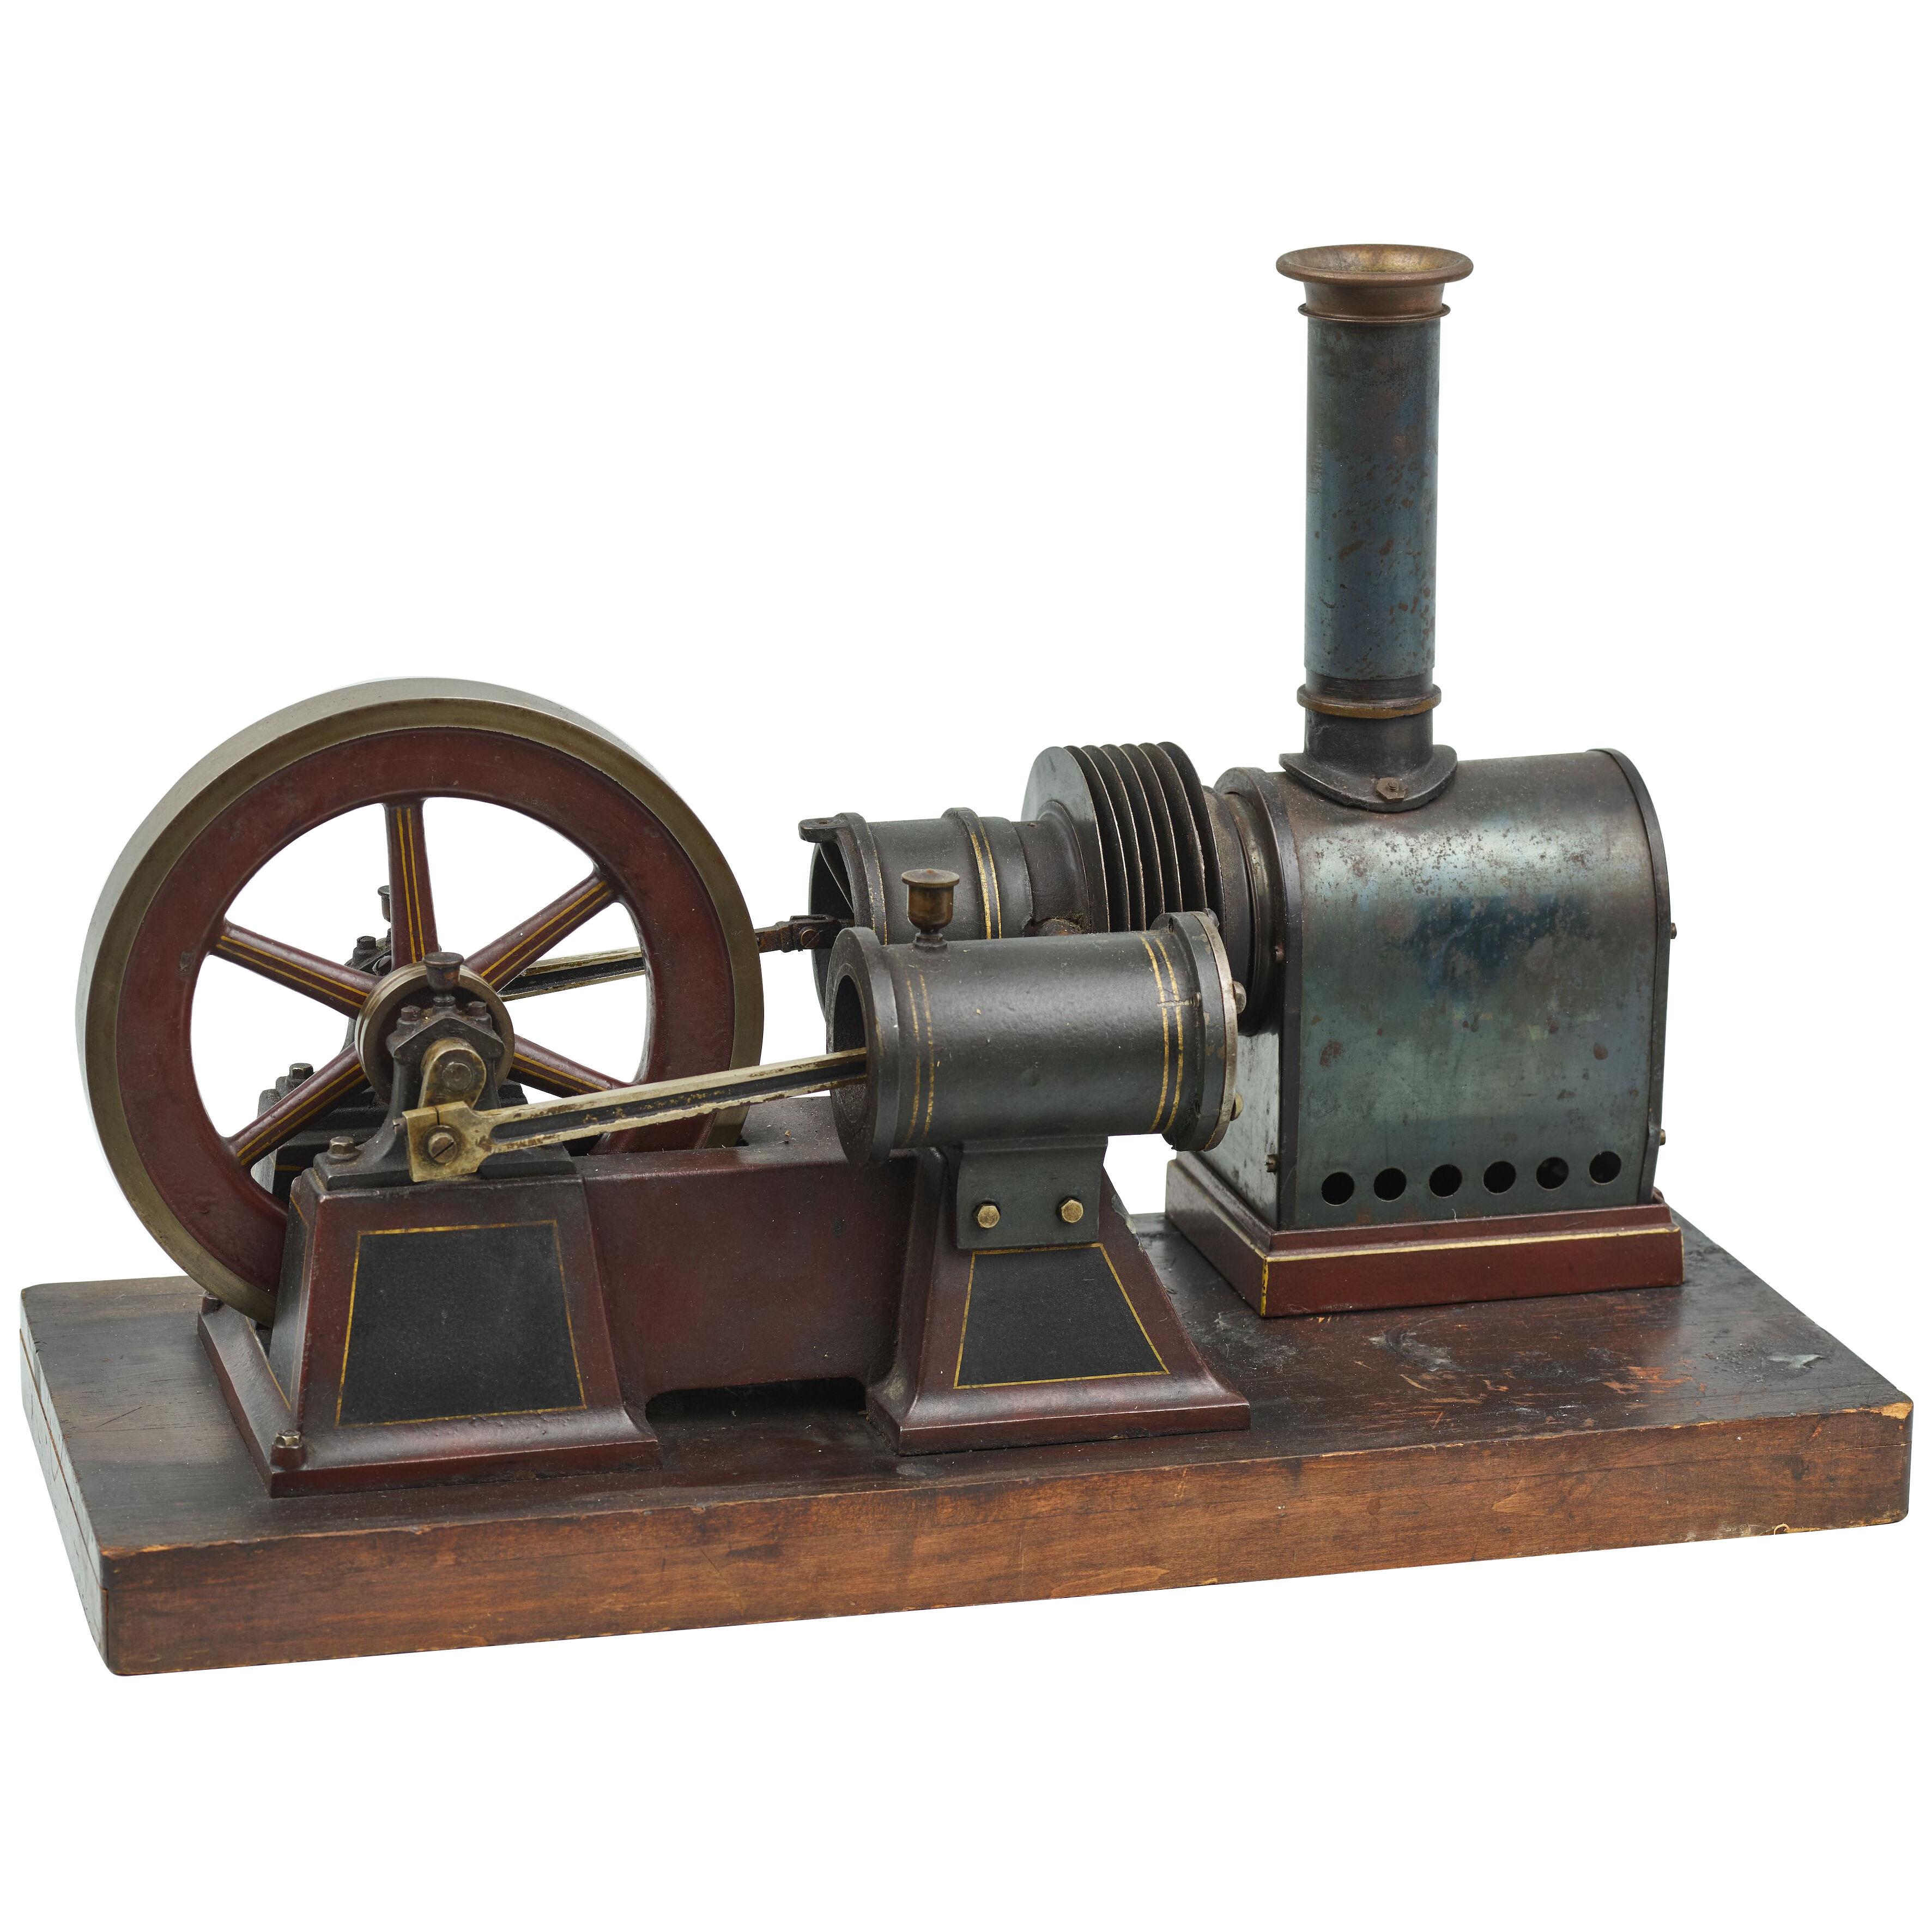 Working Model of a Steam Engine